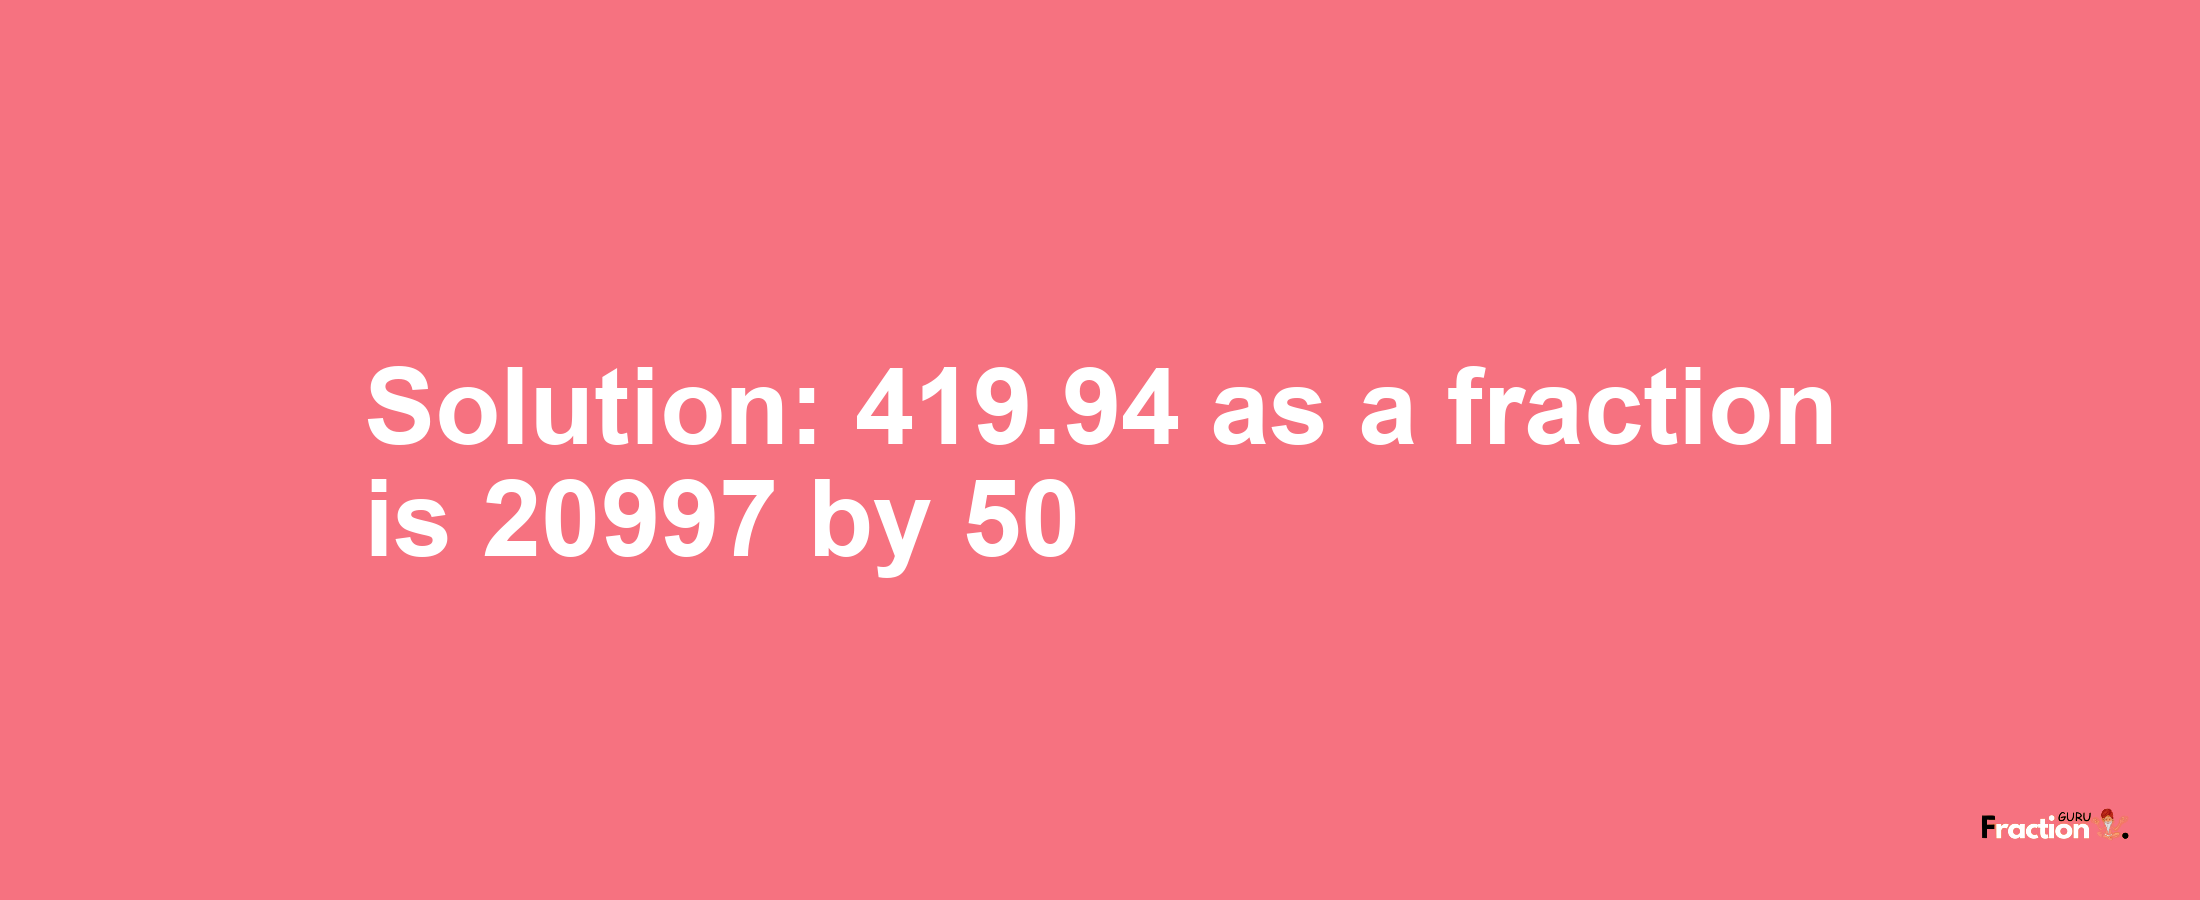 Solution:419.94 as a fraction is 20997/50